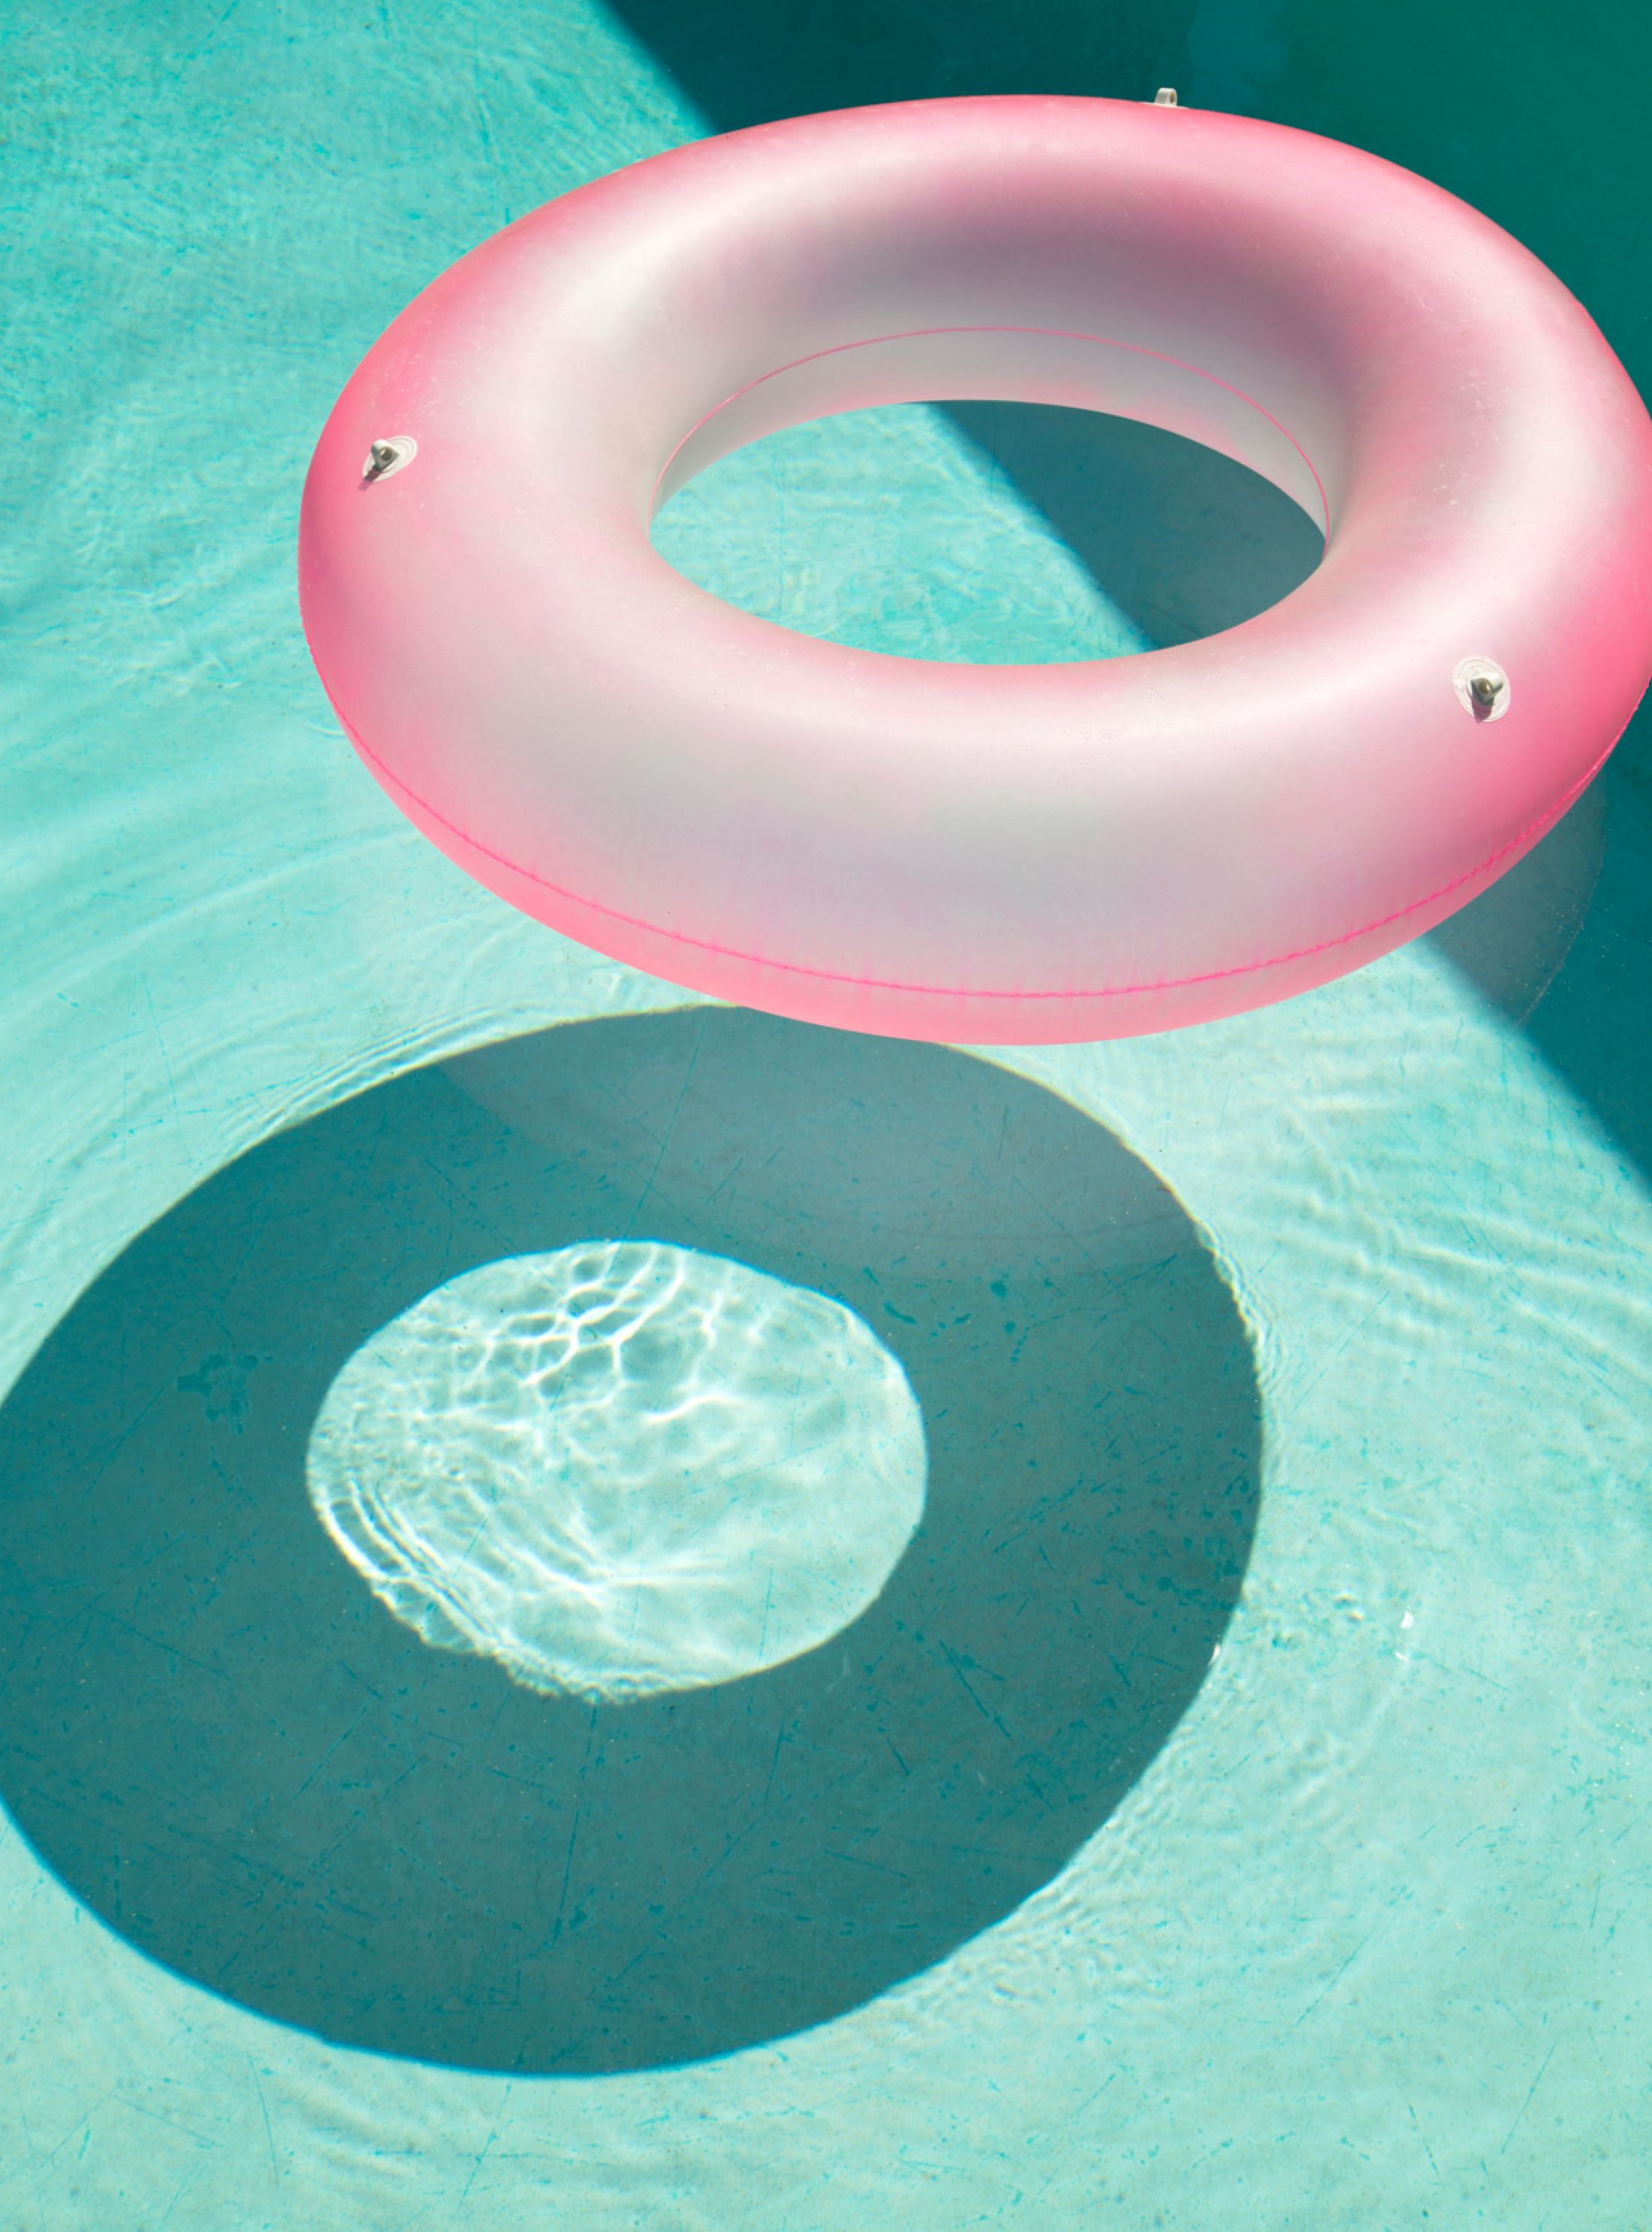 A photo of bright blue pool water with a bright pink inner tube floating in it.